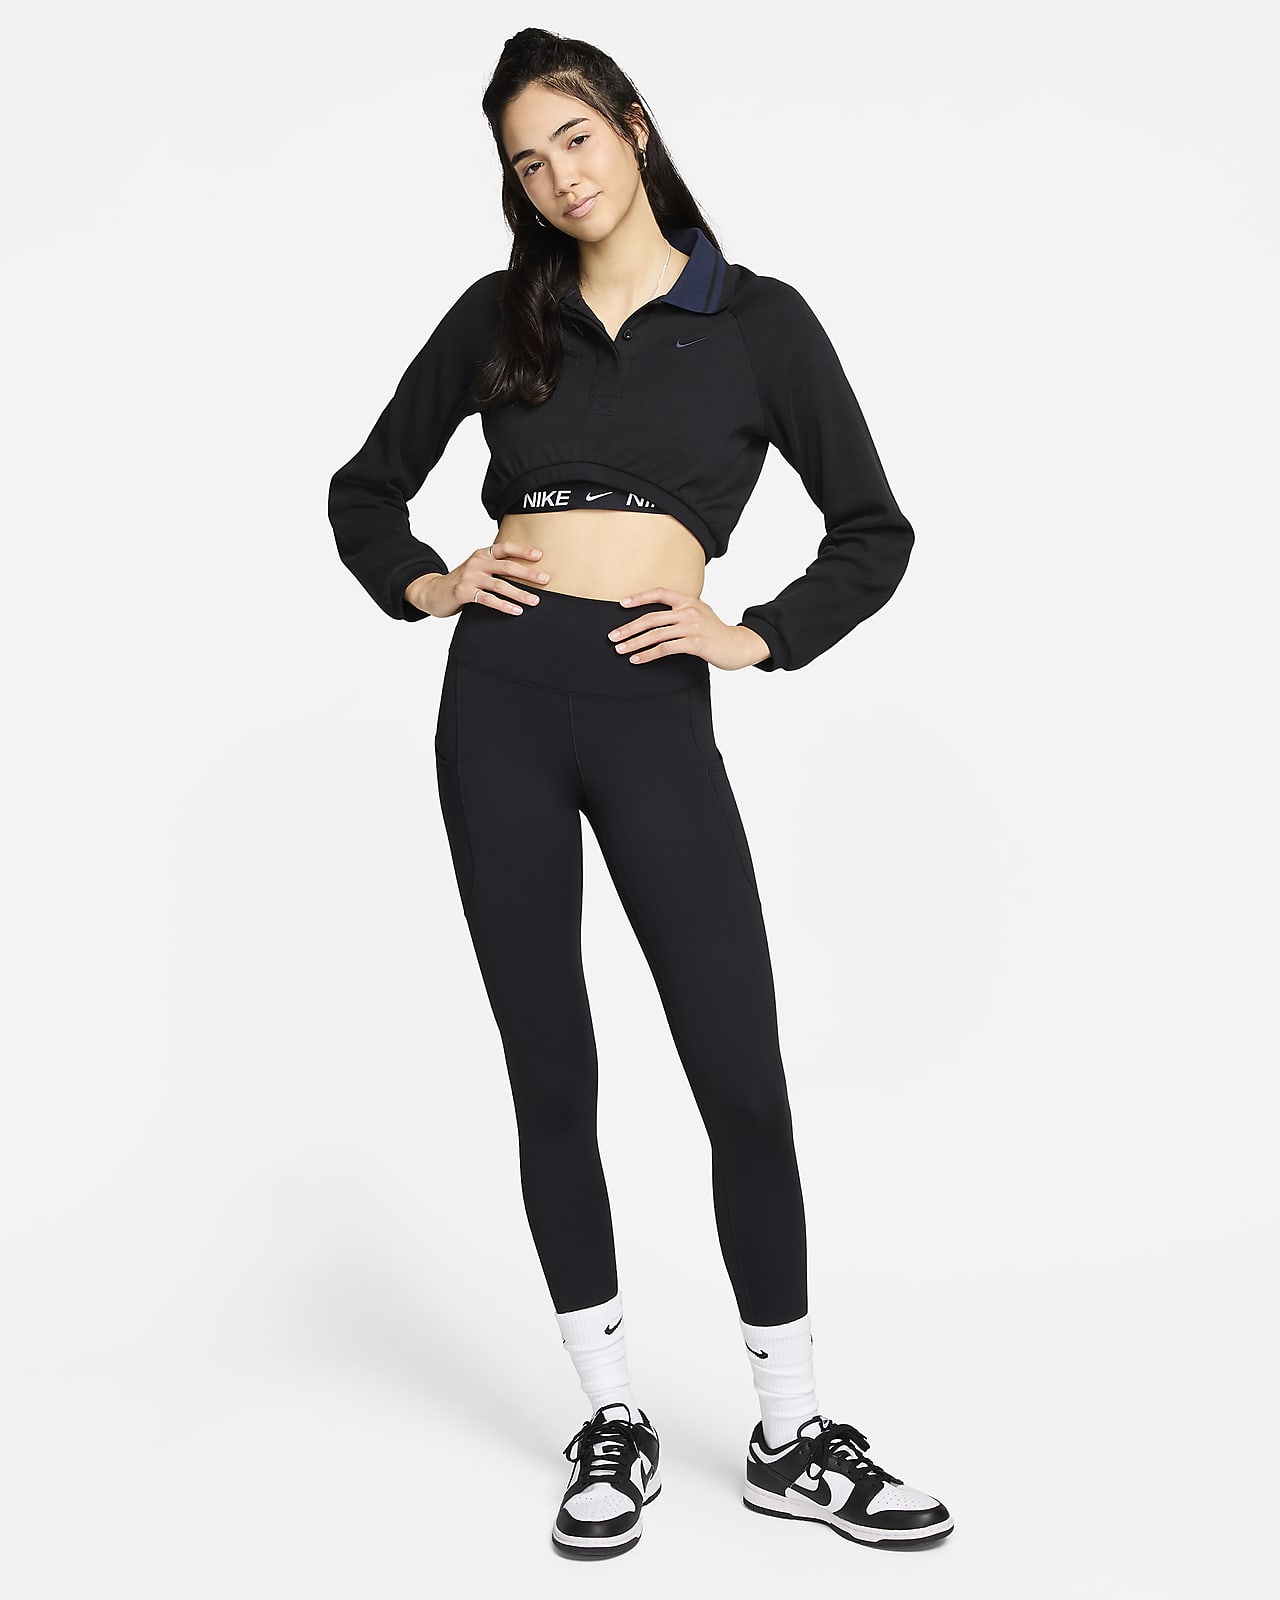 Nike One Women's High-Waisted 7/8 Leggings with Pockets.